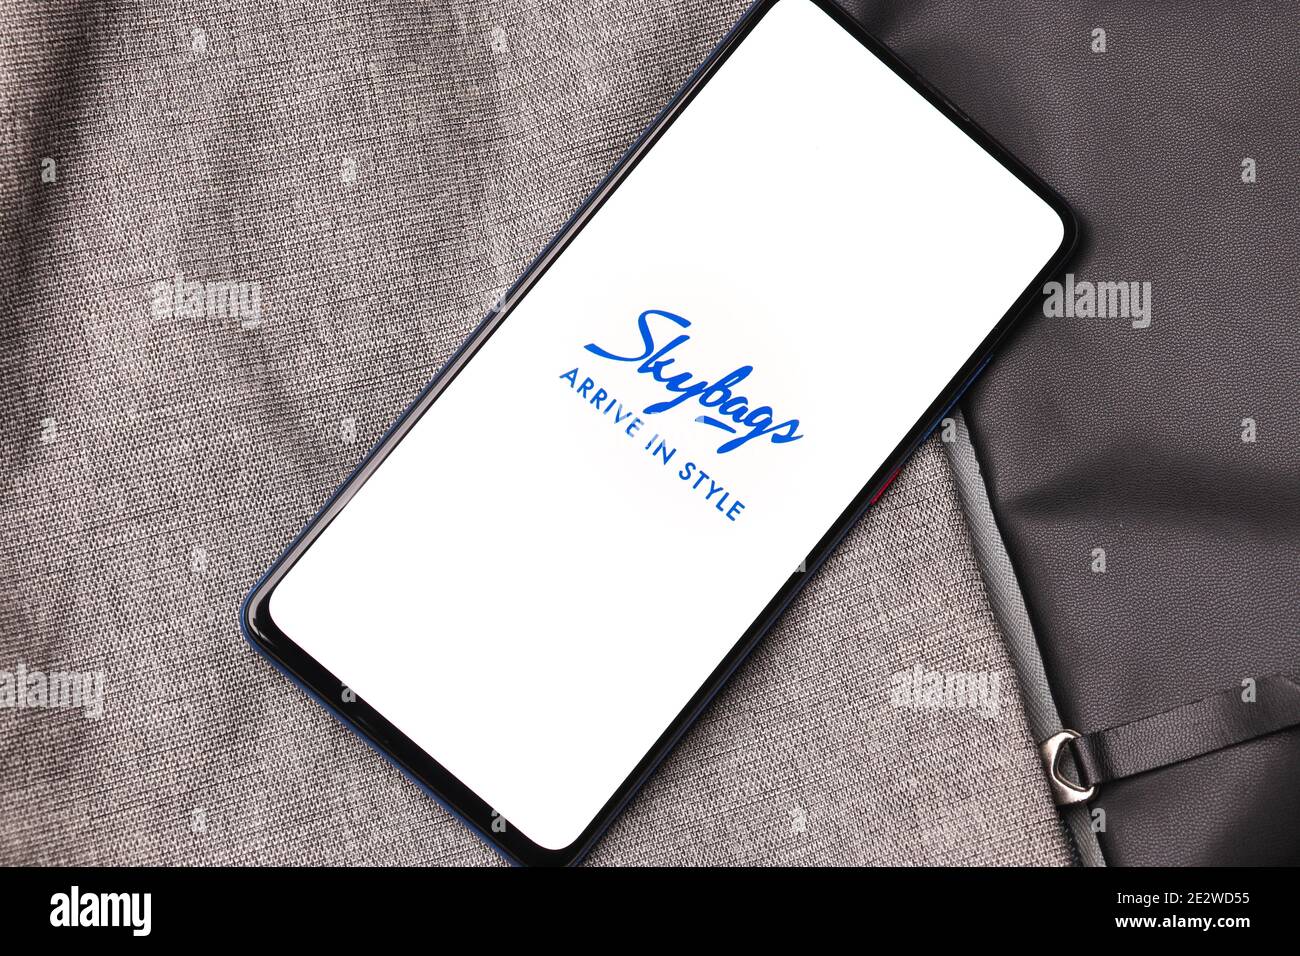 assam india january 15 2020 skybags logo on phone screen stock image 2E2WD55